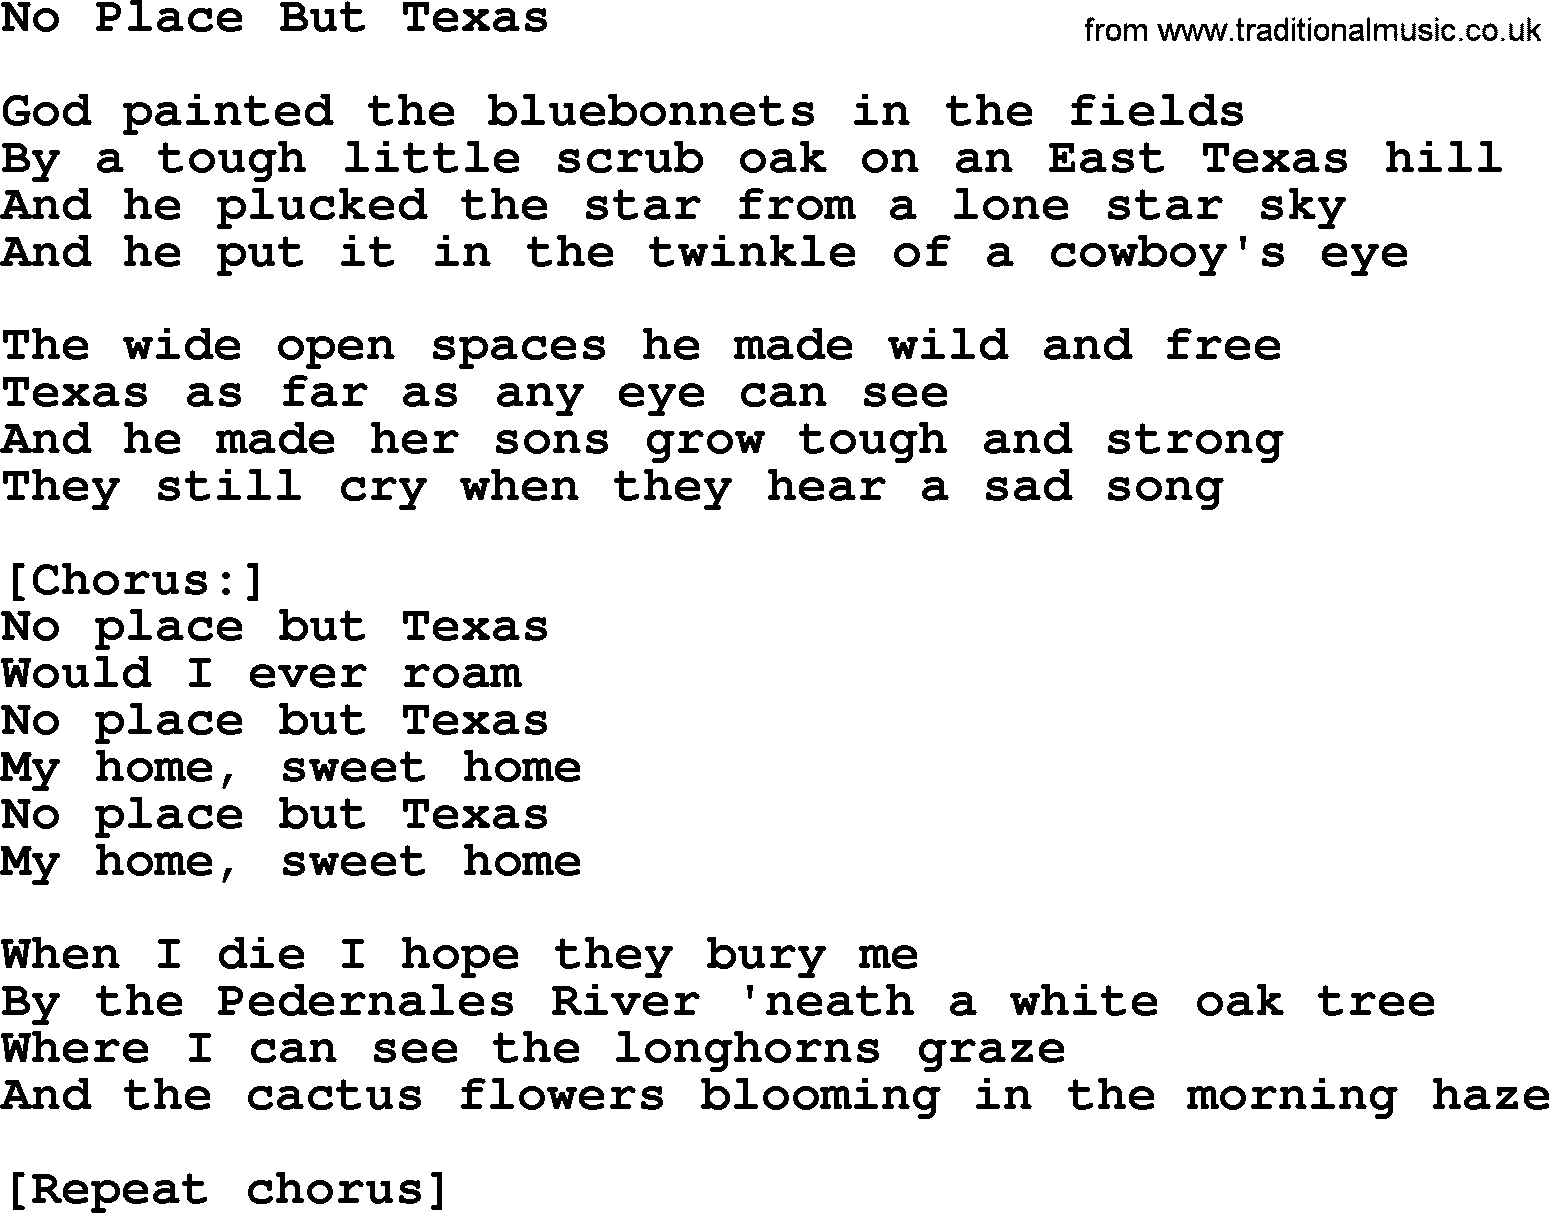 Willie Nelson song: No Place But Texas lyrics